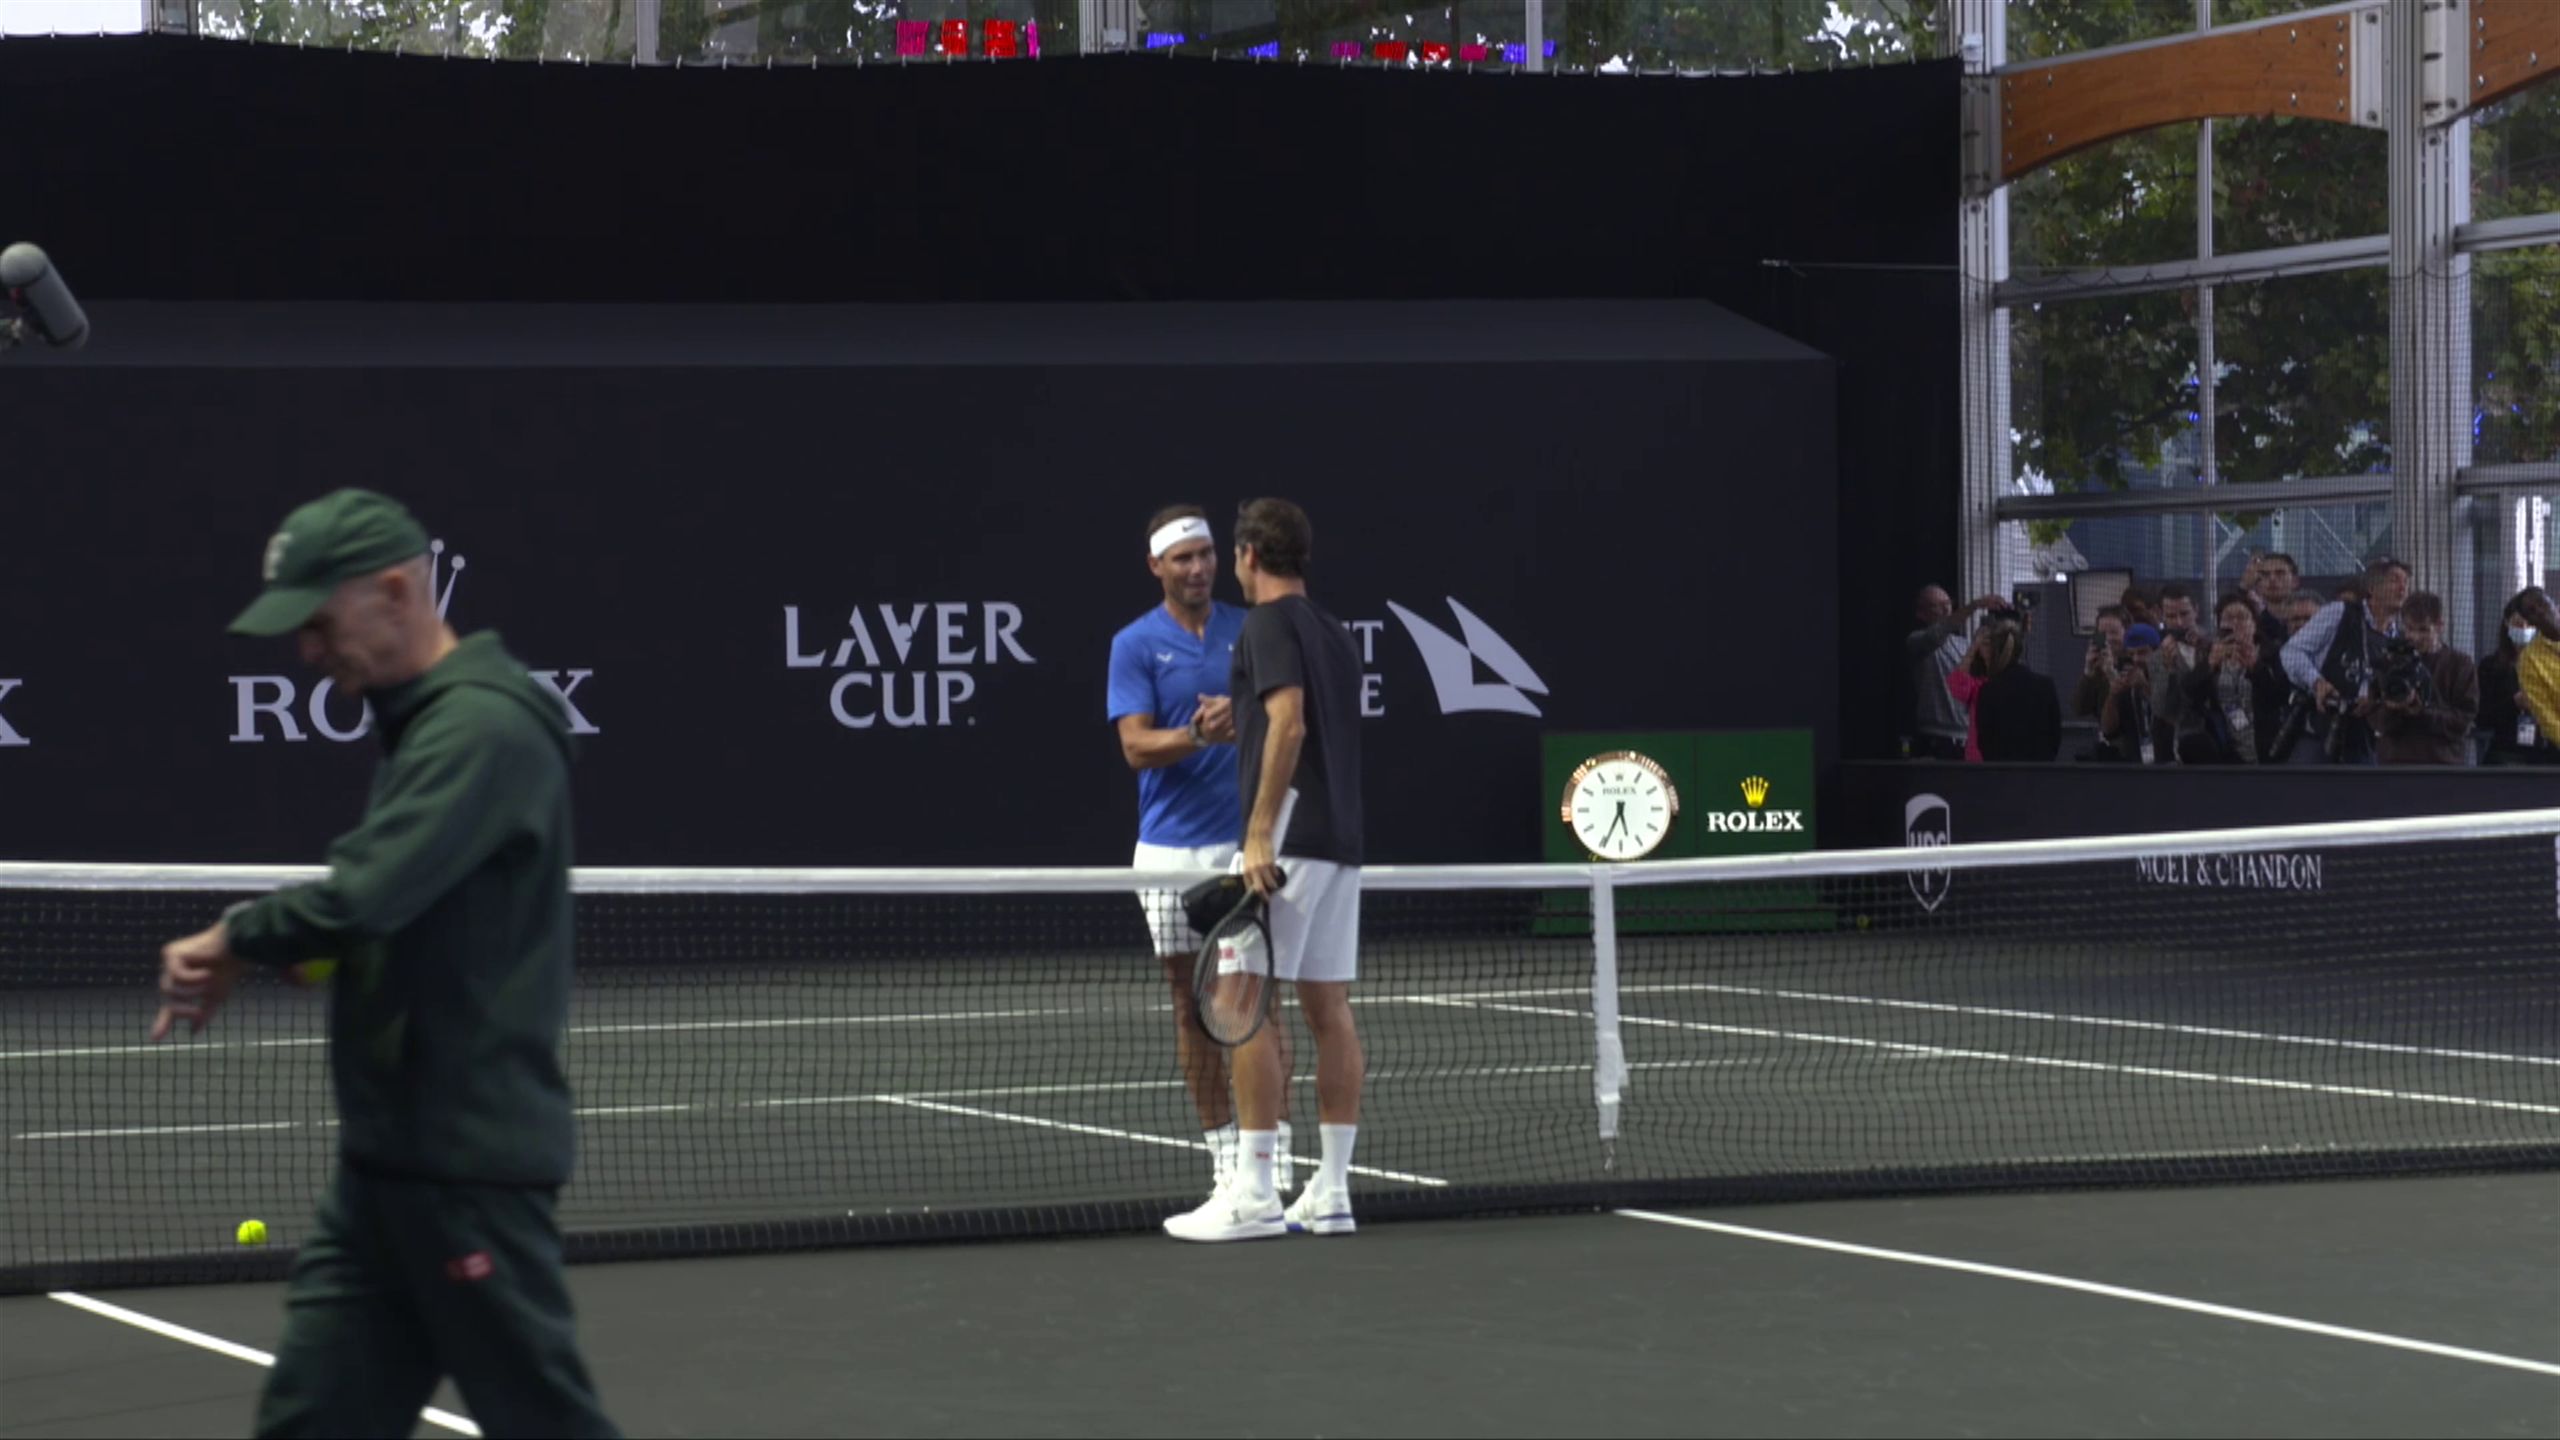 Watch Roger Federer and Rafael Nadals final practice session together before Laver Cup farewell match - Tennis video